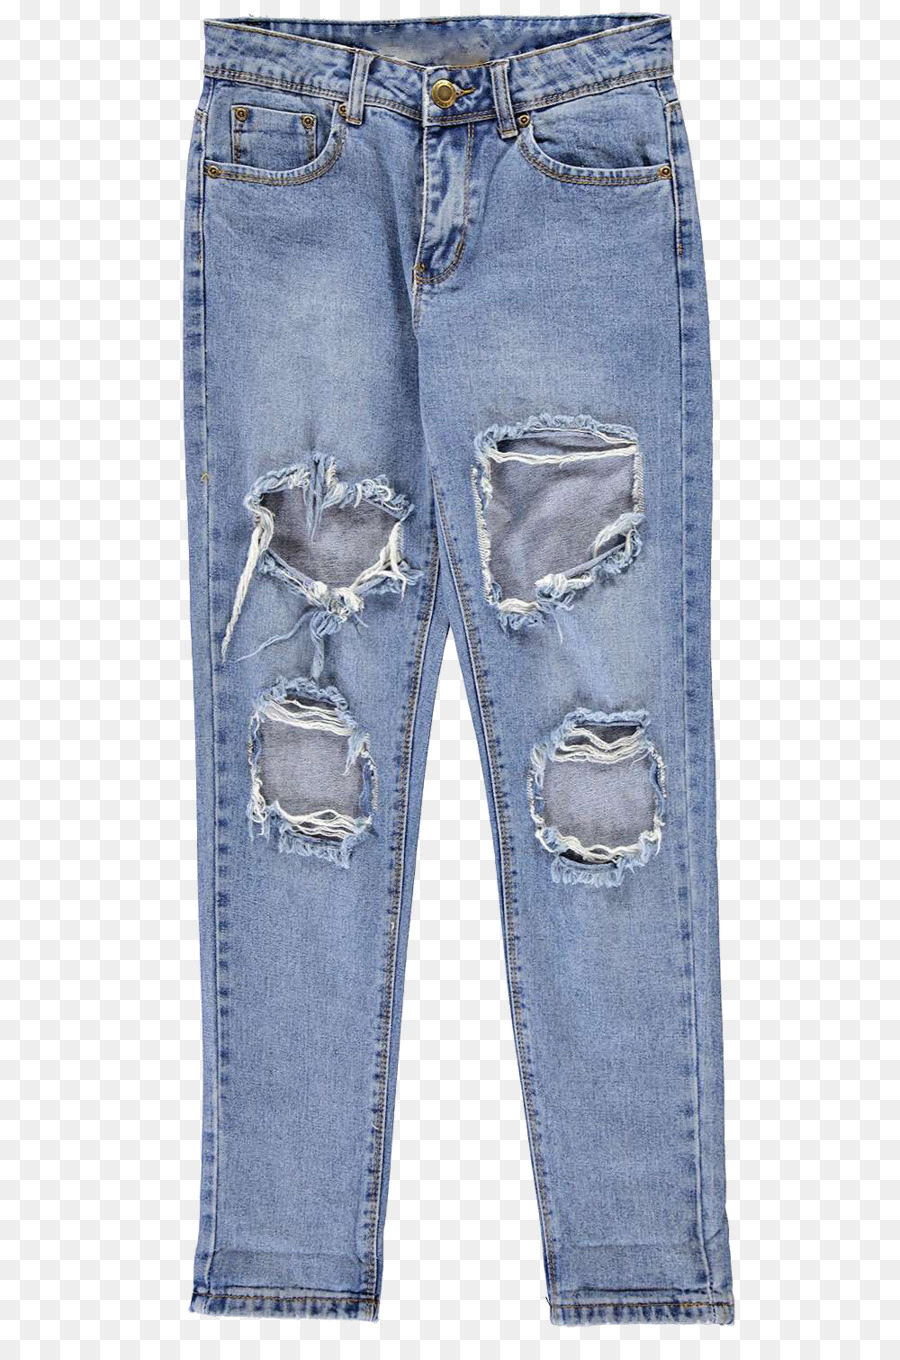 Ripped Jeans Png & Free Ripped Jeans.png Transparent Images.